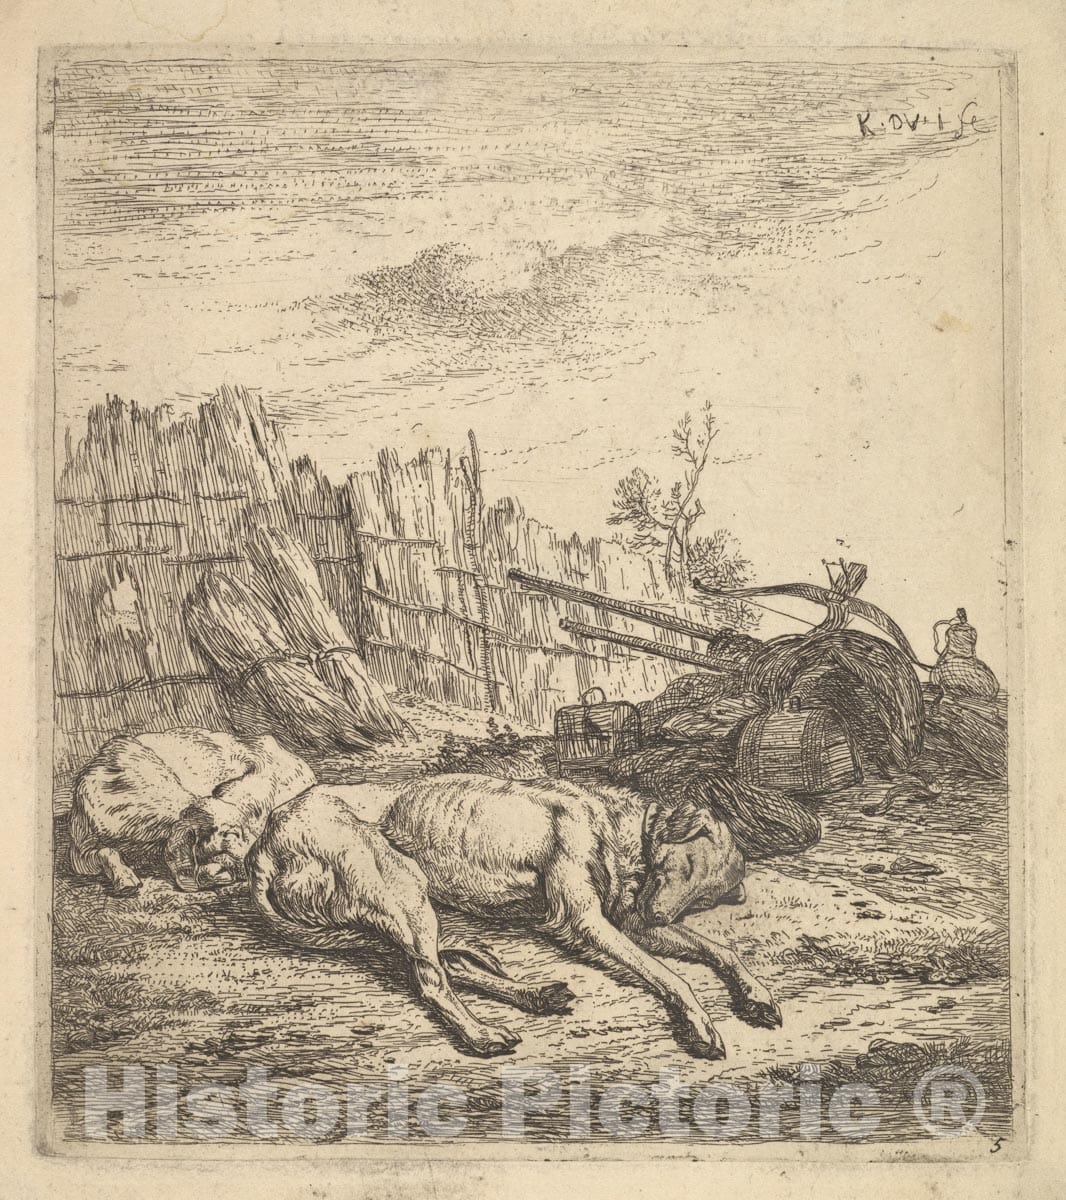 Art Print : Karel Dujardin - Two Dogs Sleeping on The Ground; a Plough, Farm Equipment, Bunches of Straw, and a Fence Beyond : Vintage Wall Art